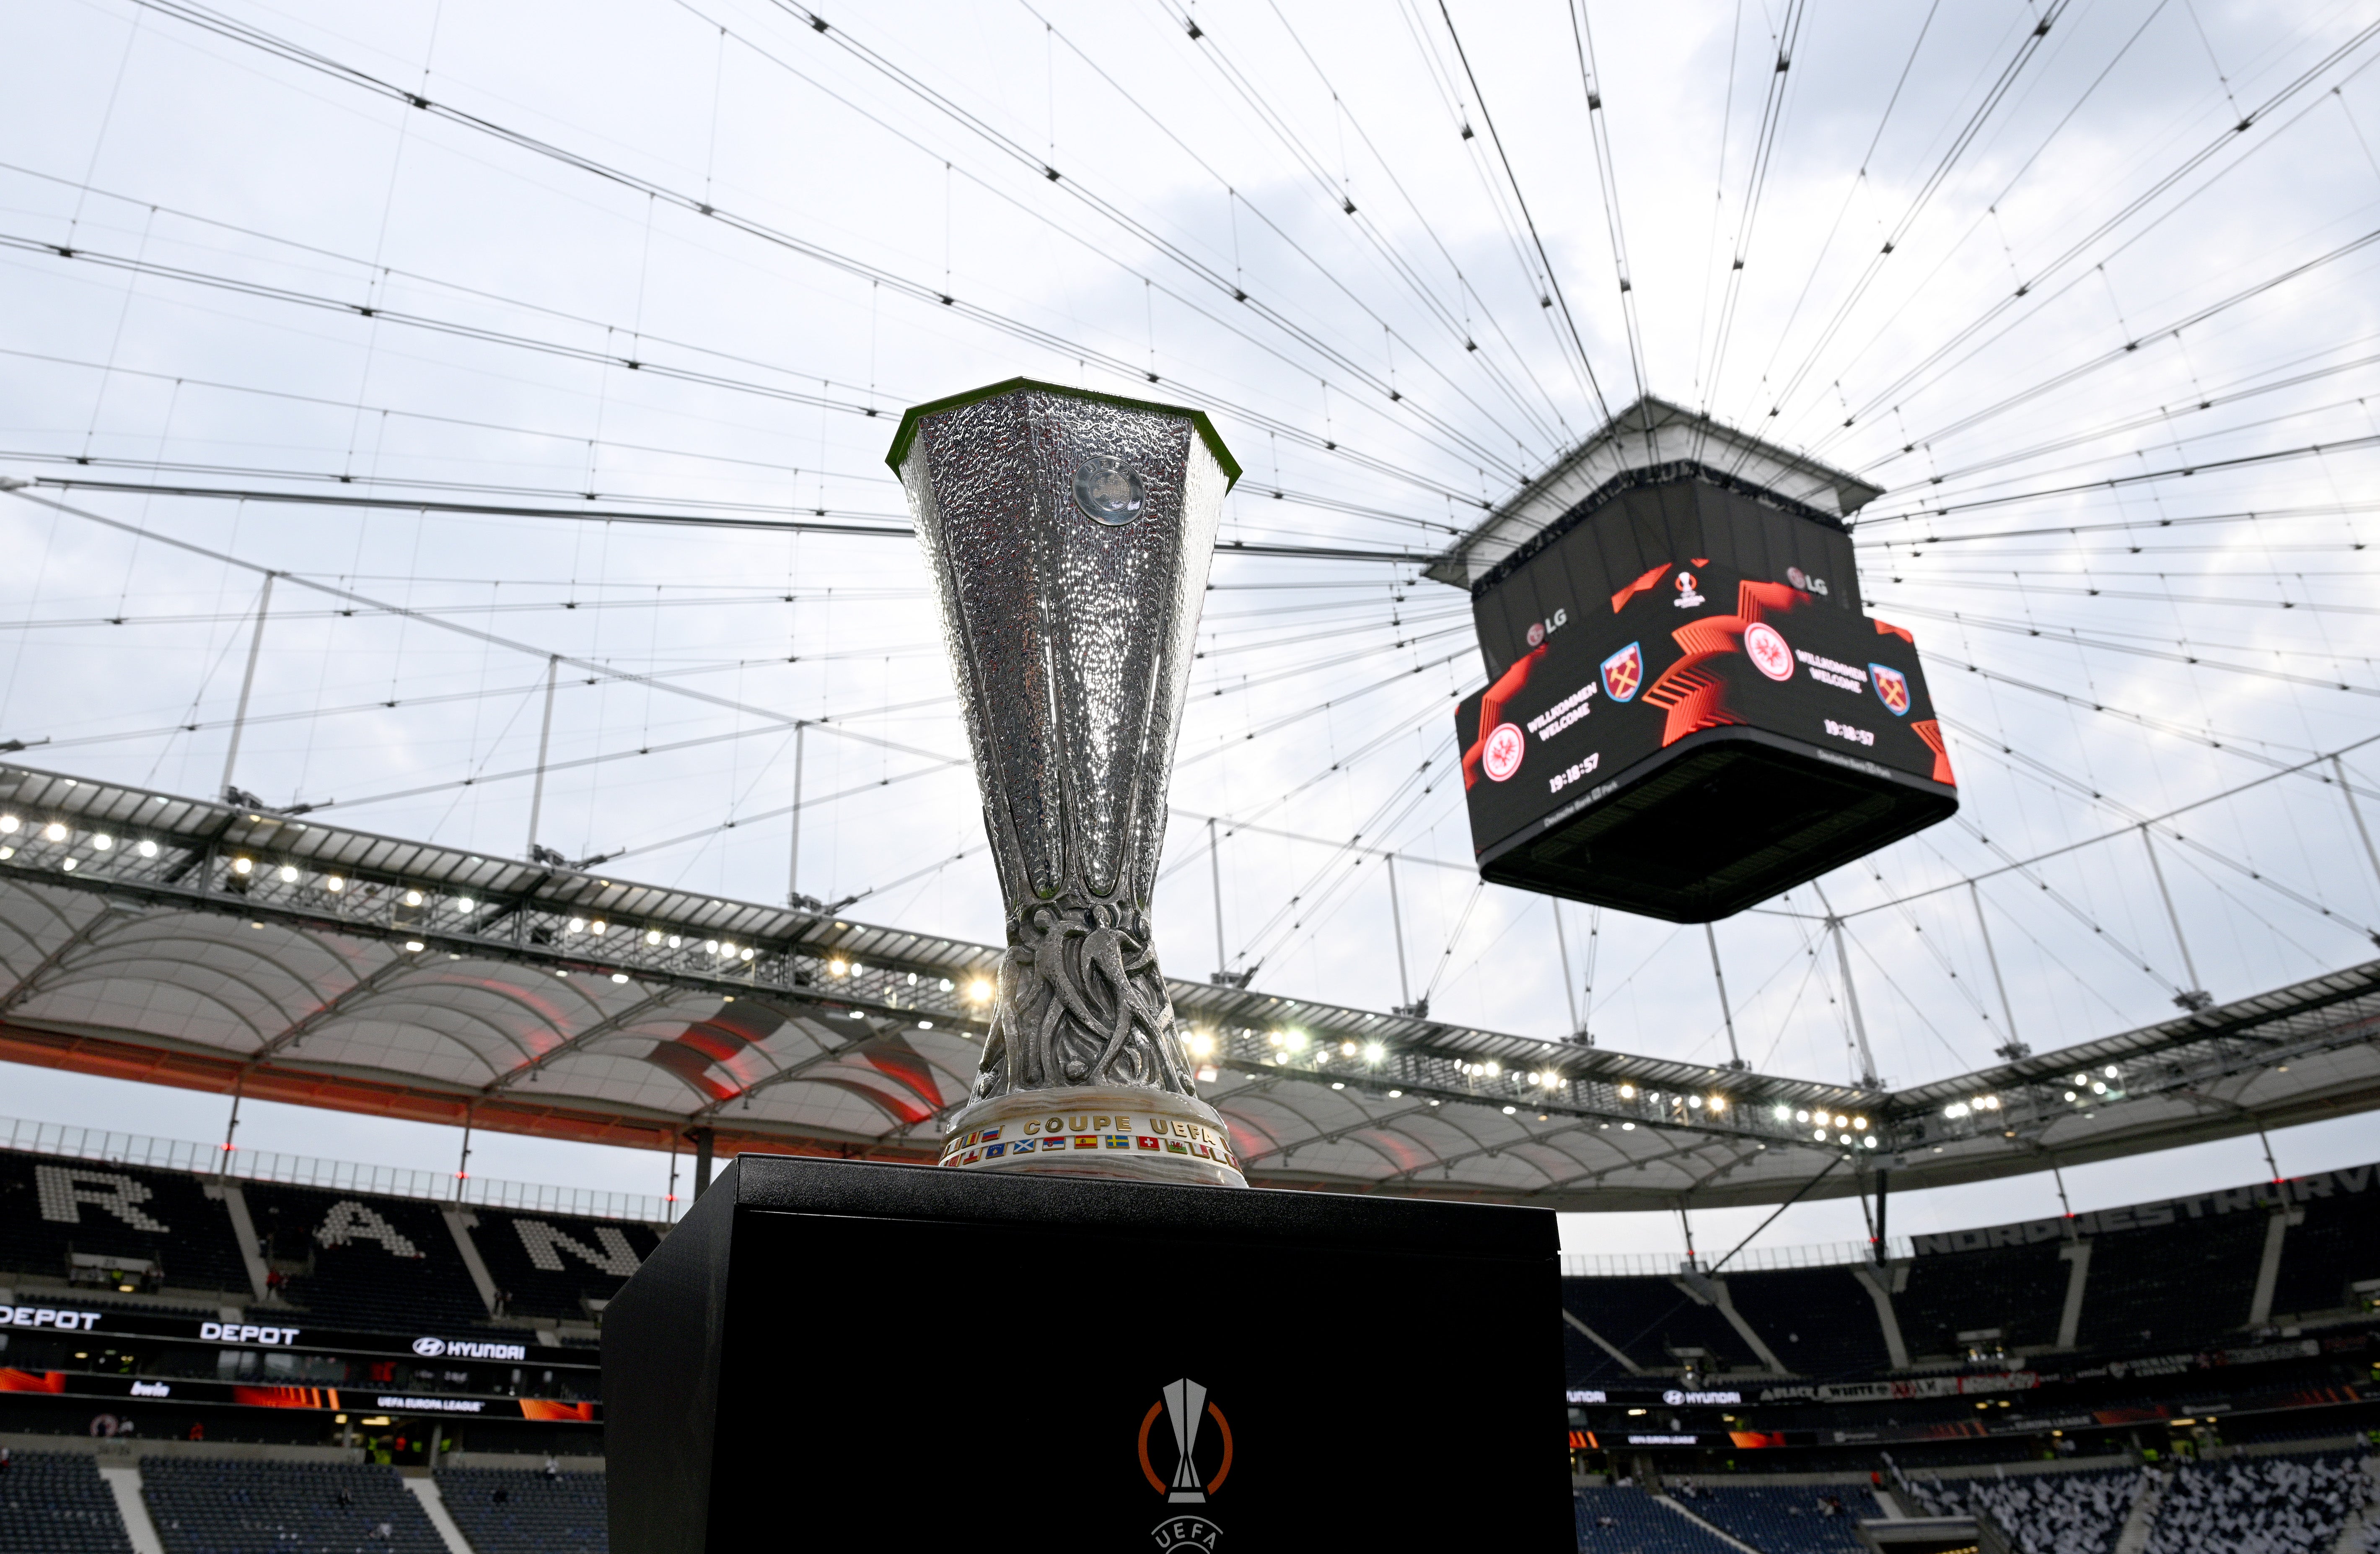 The Europa League final could be headed to Hampden Park